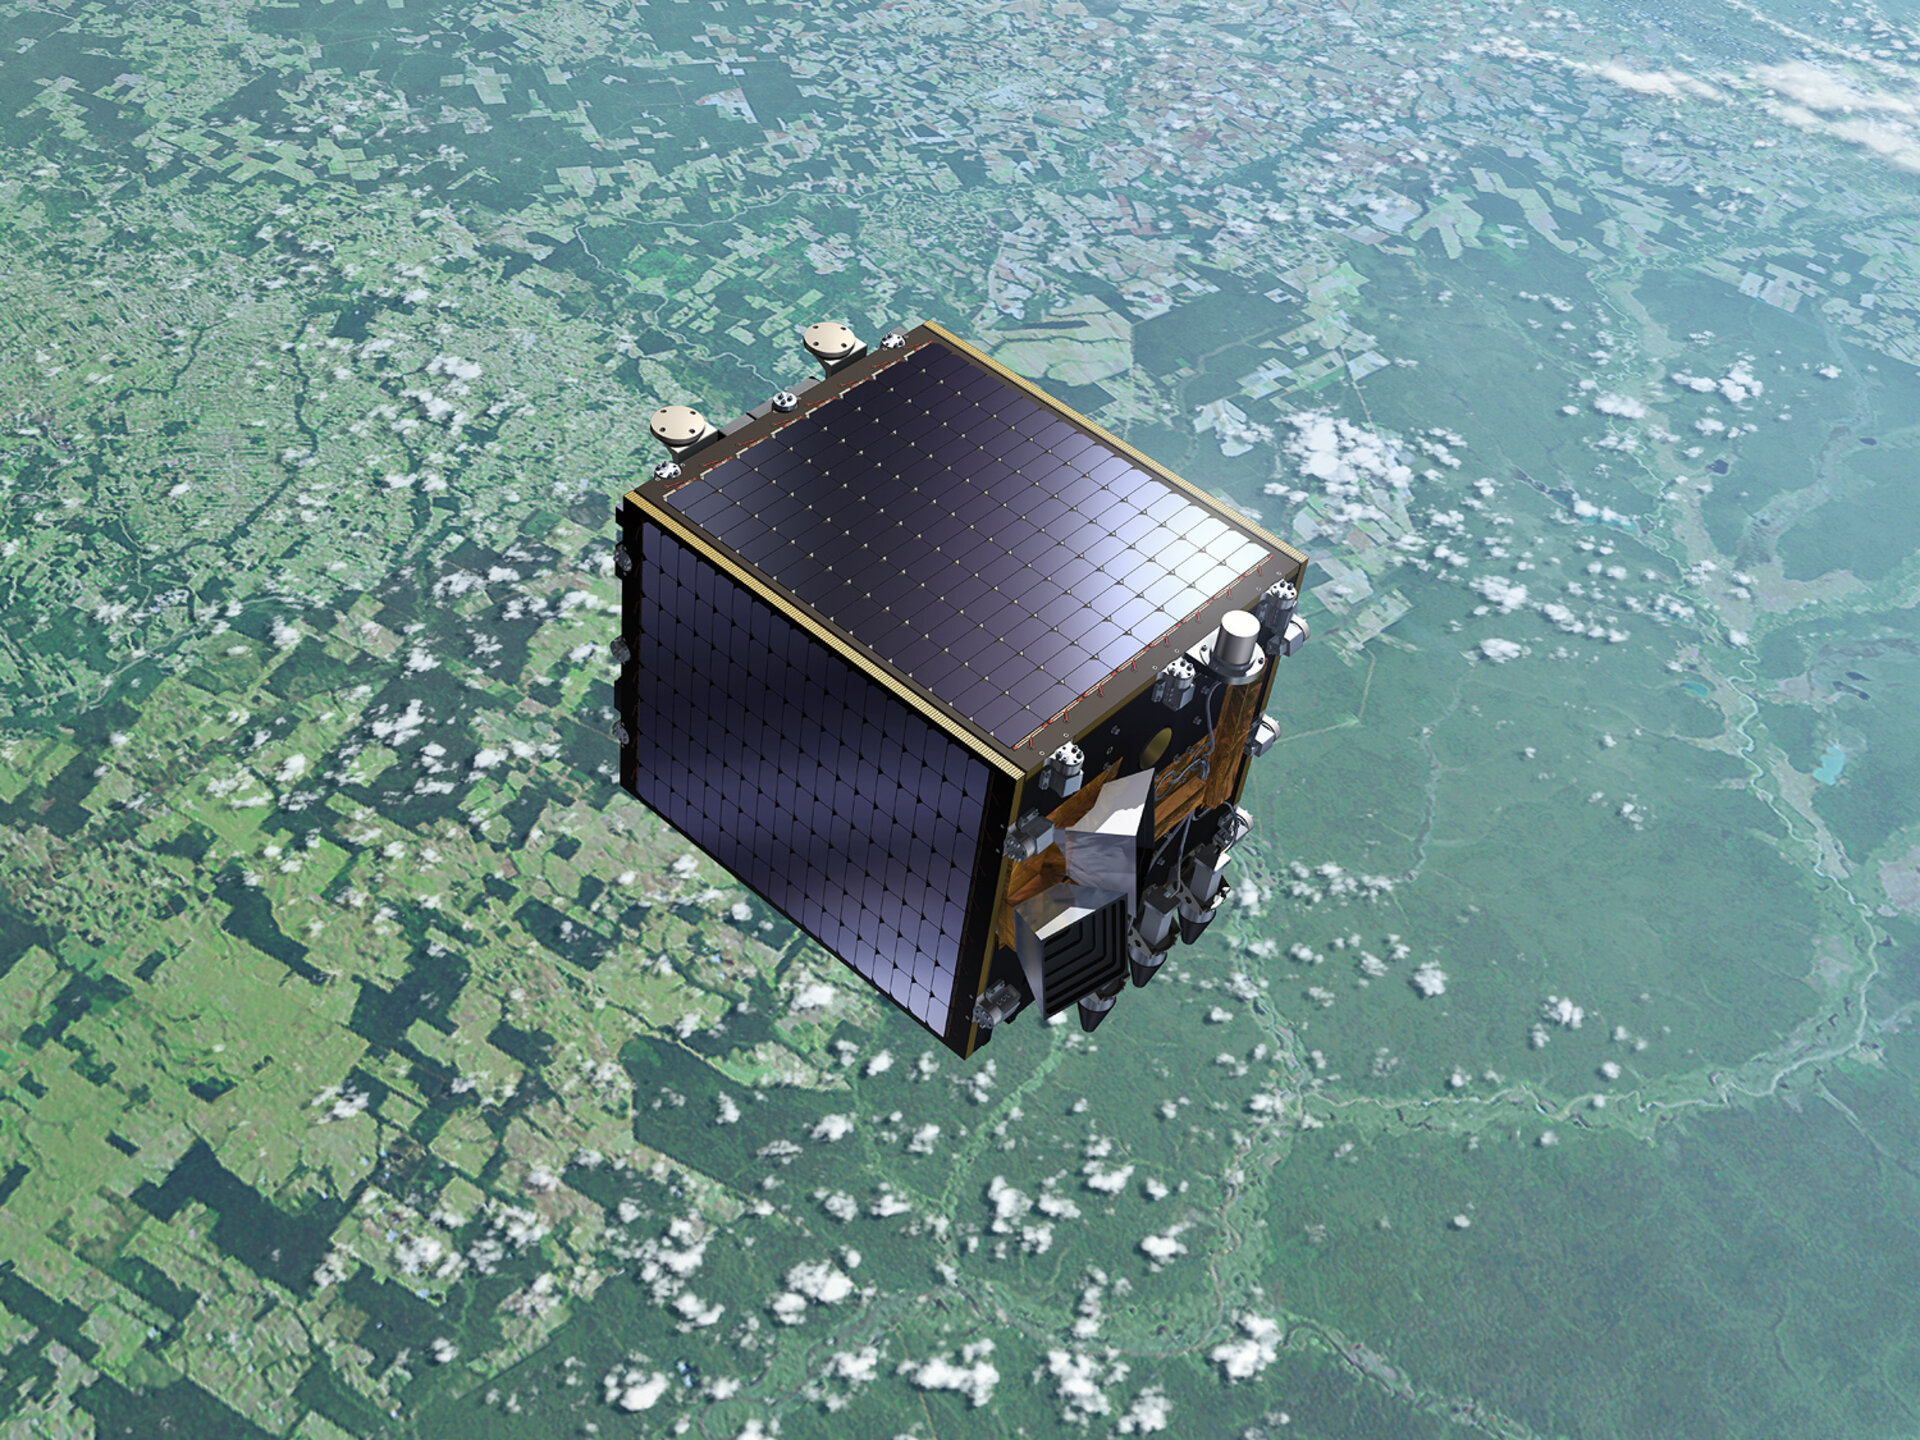 Proba-V: small but powerful satellite